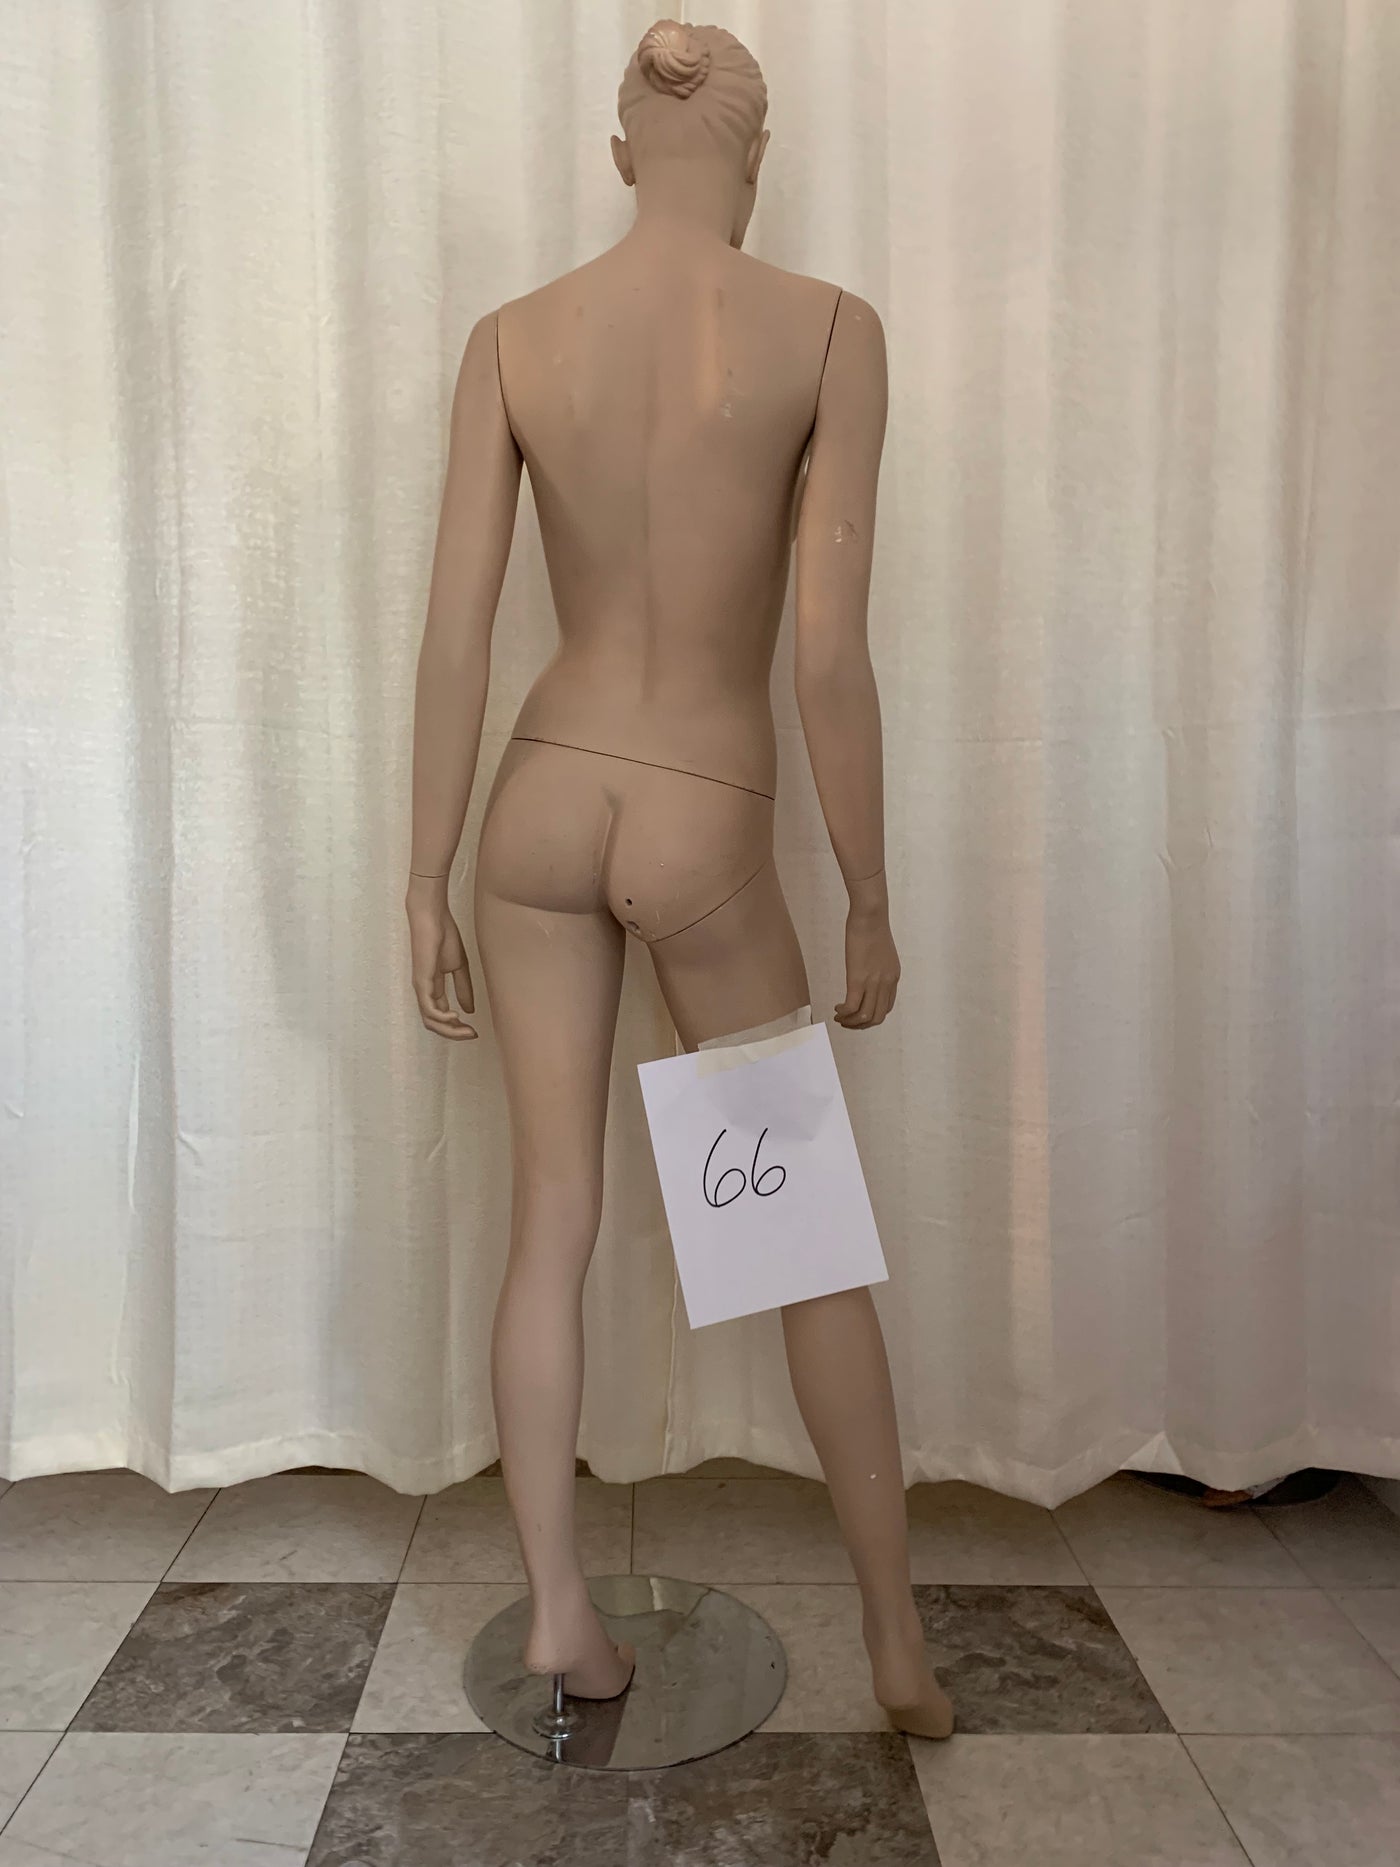 Used Female Adel Rootstein Mannequin #66 Girl Thing